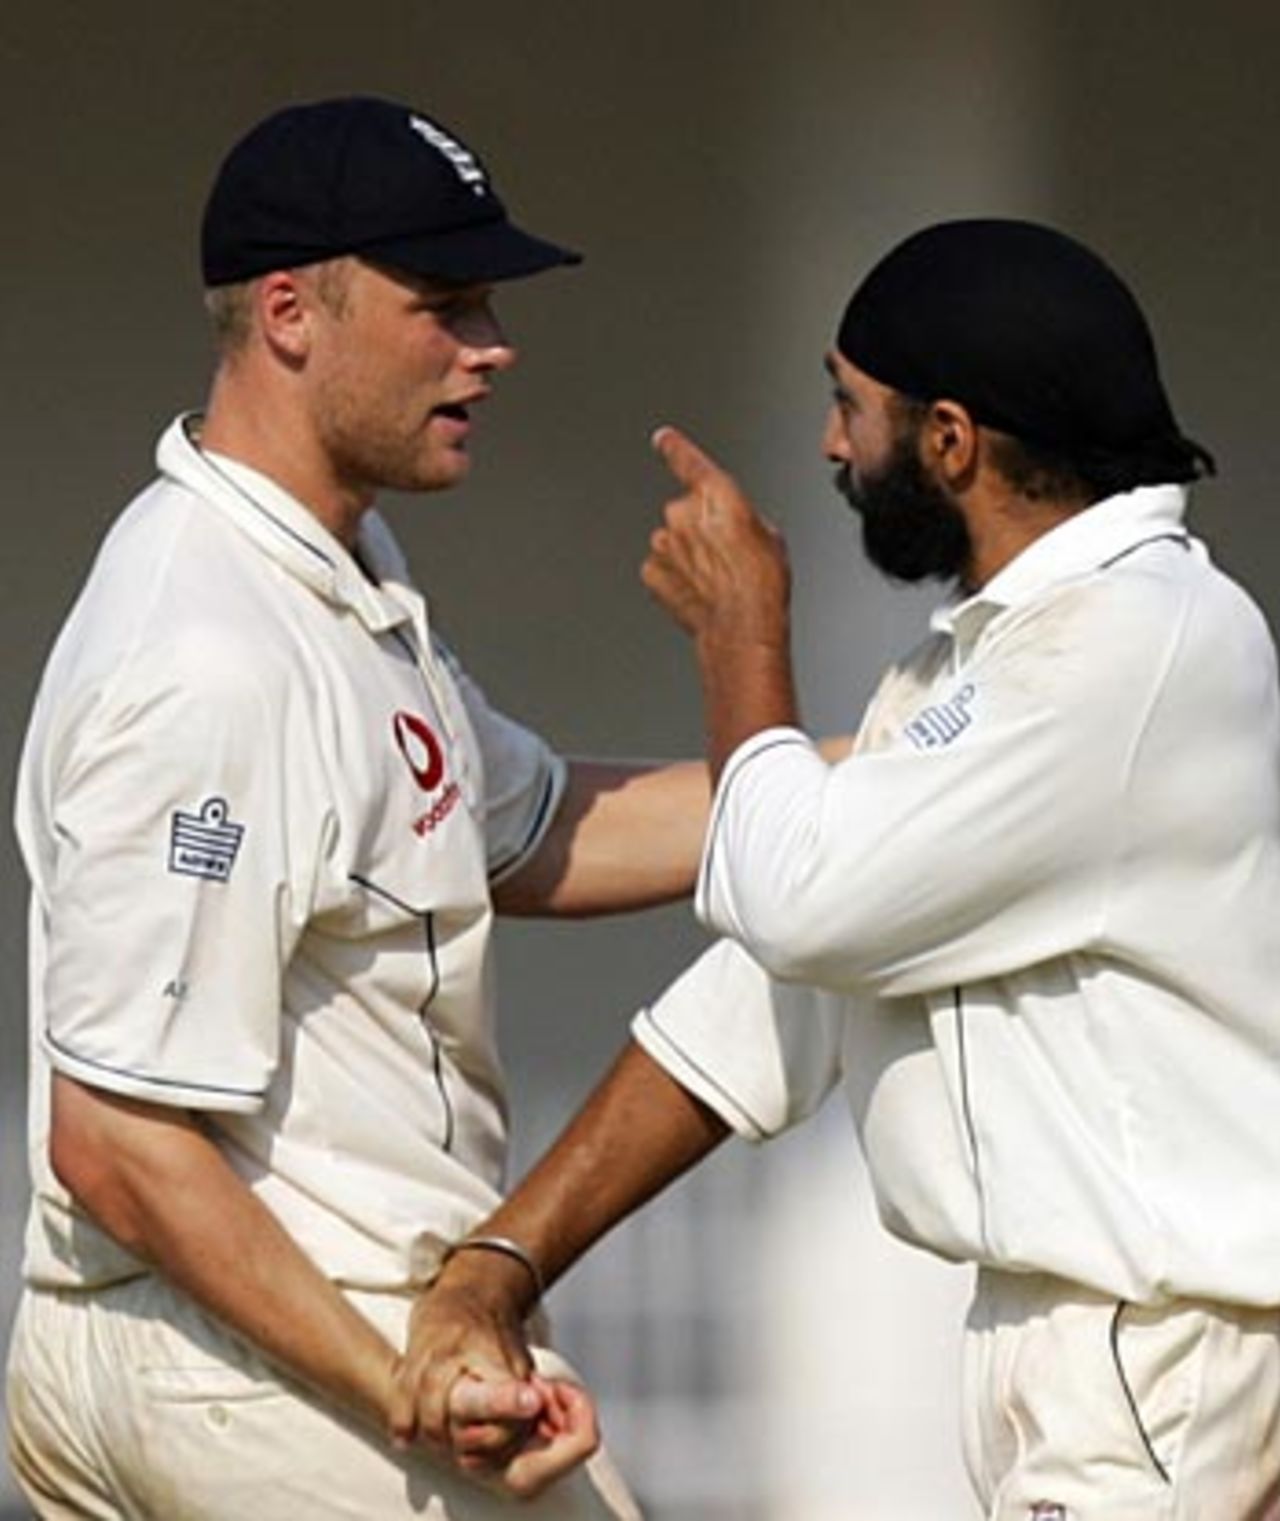 Monty Panesar and Andrew Flintoff after Rahul Dravid's dismissal, India v England, 1st Test, Nagpur, March 5, 2006